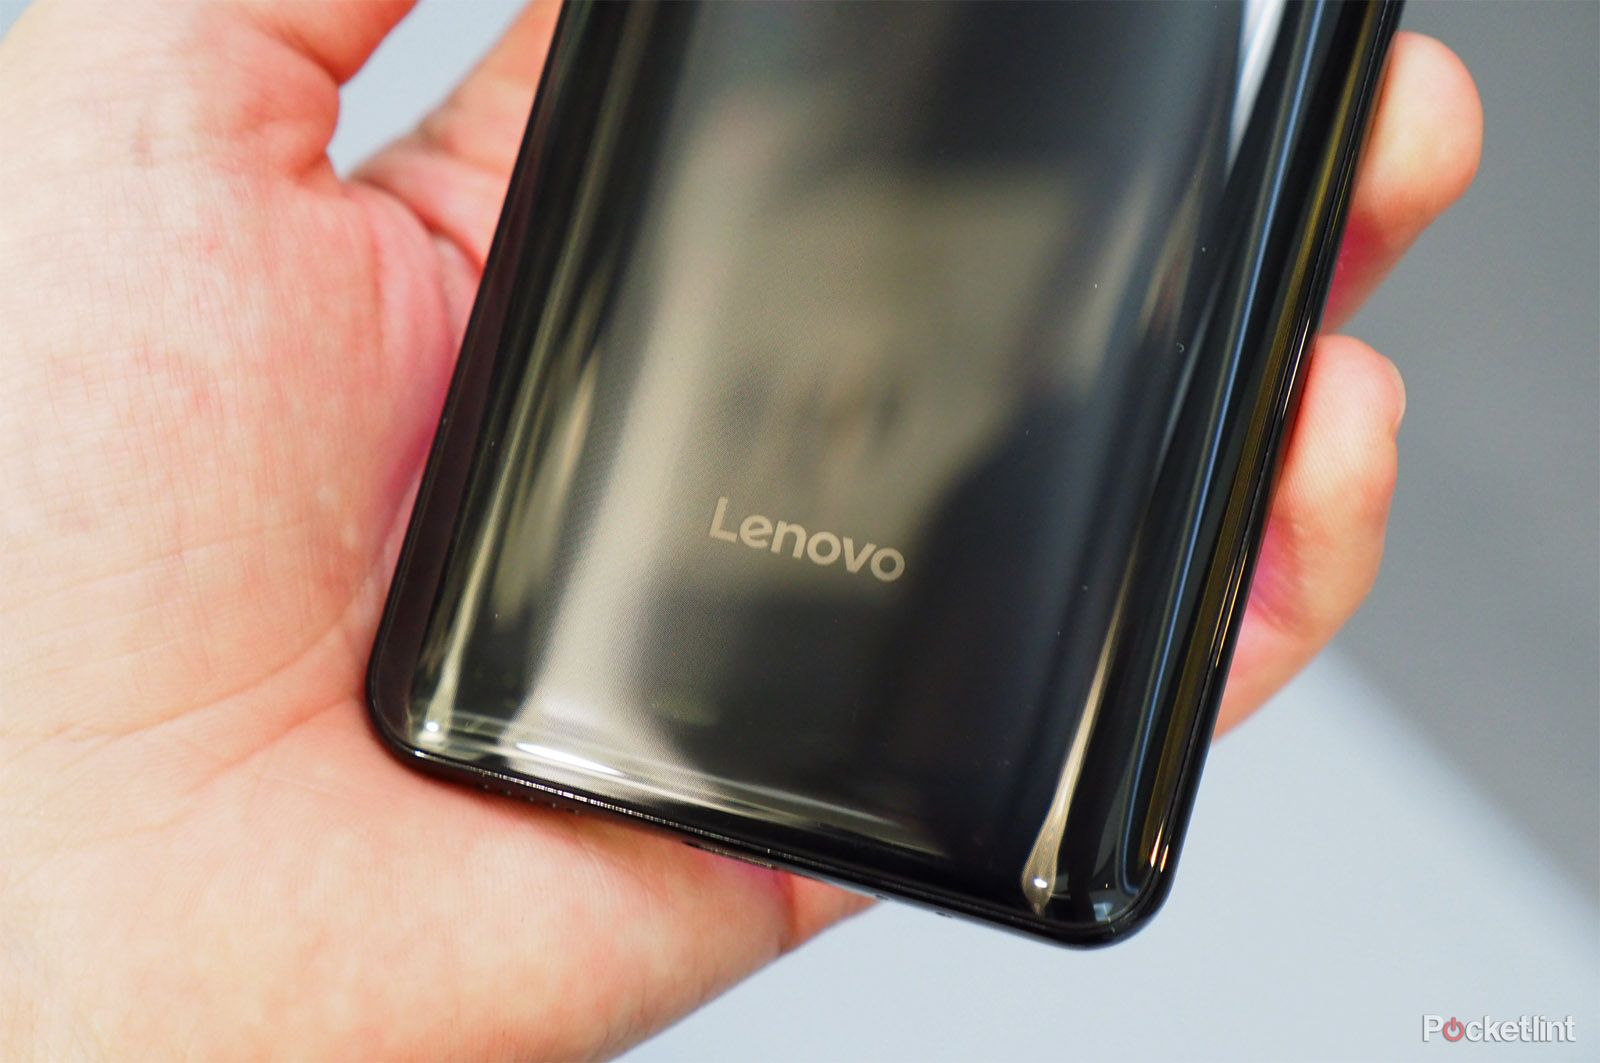 The Lenovo ThinkPhone could be a rebranded Motorola handset photo 3